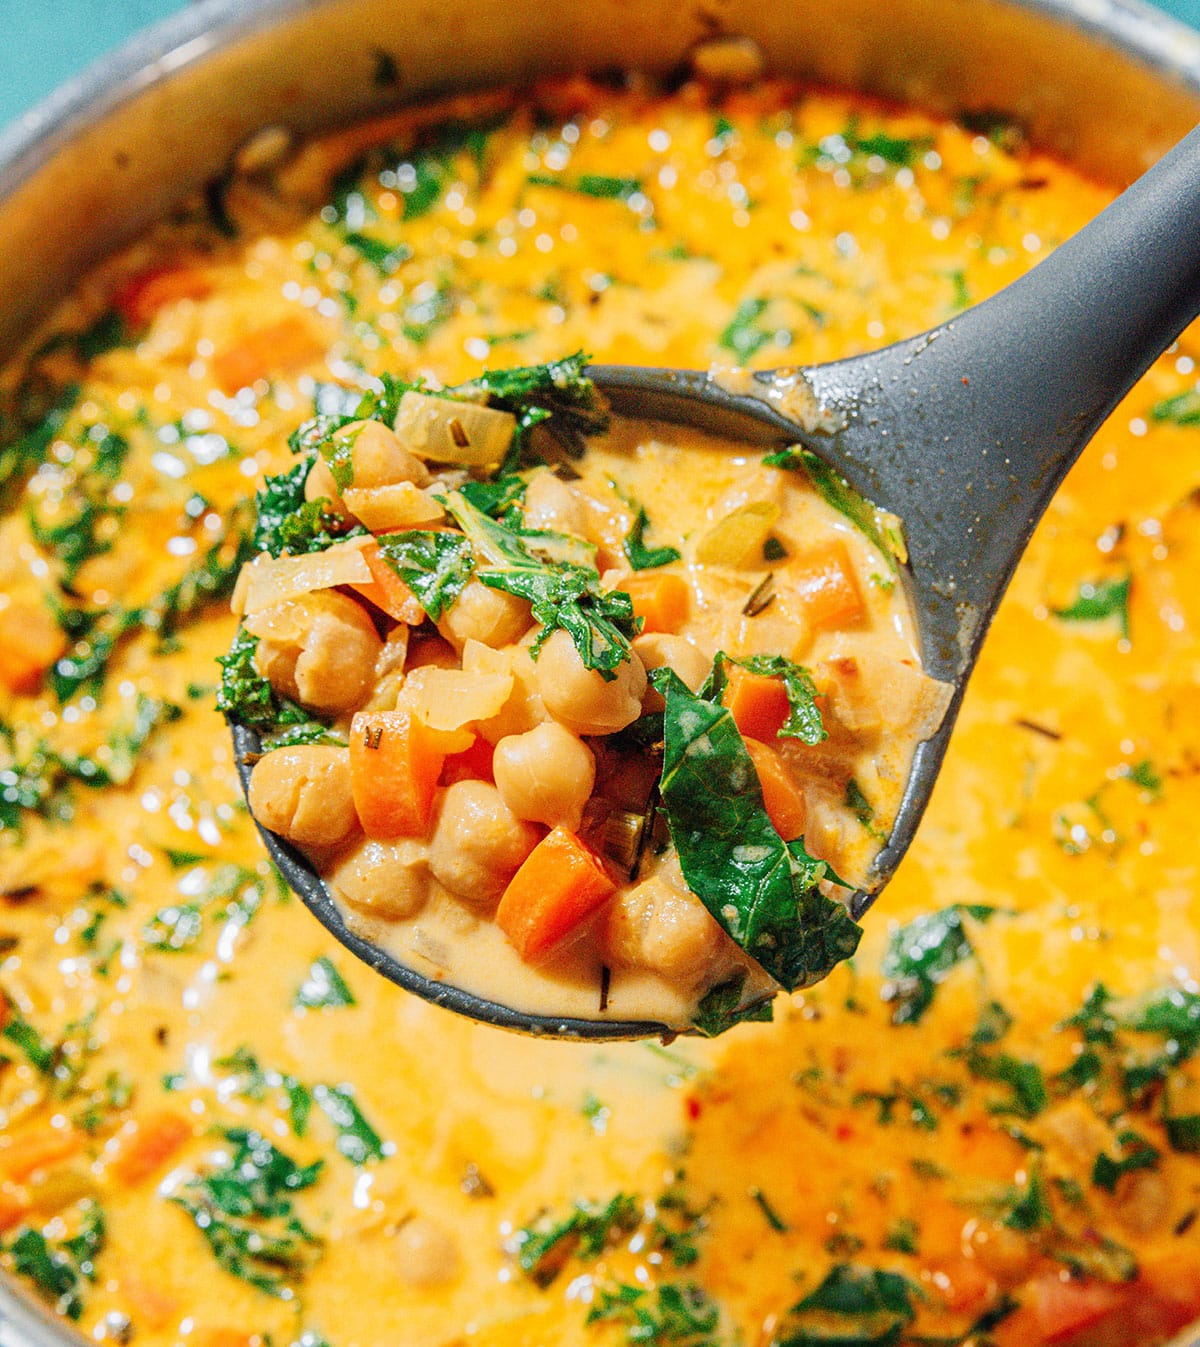 Chickpea soup in a pan with a ladle.